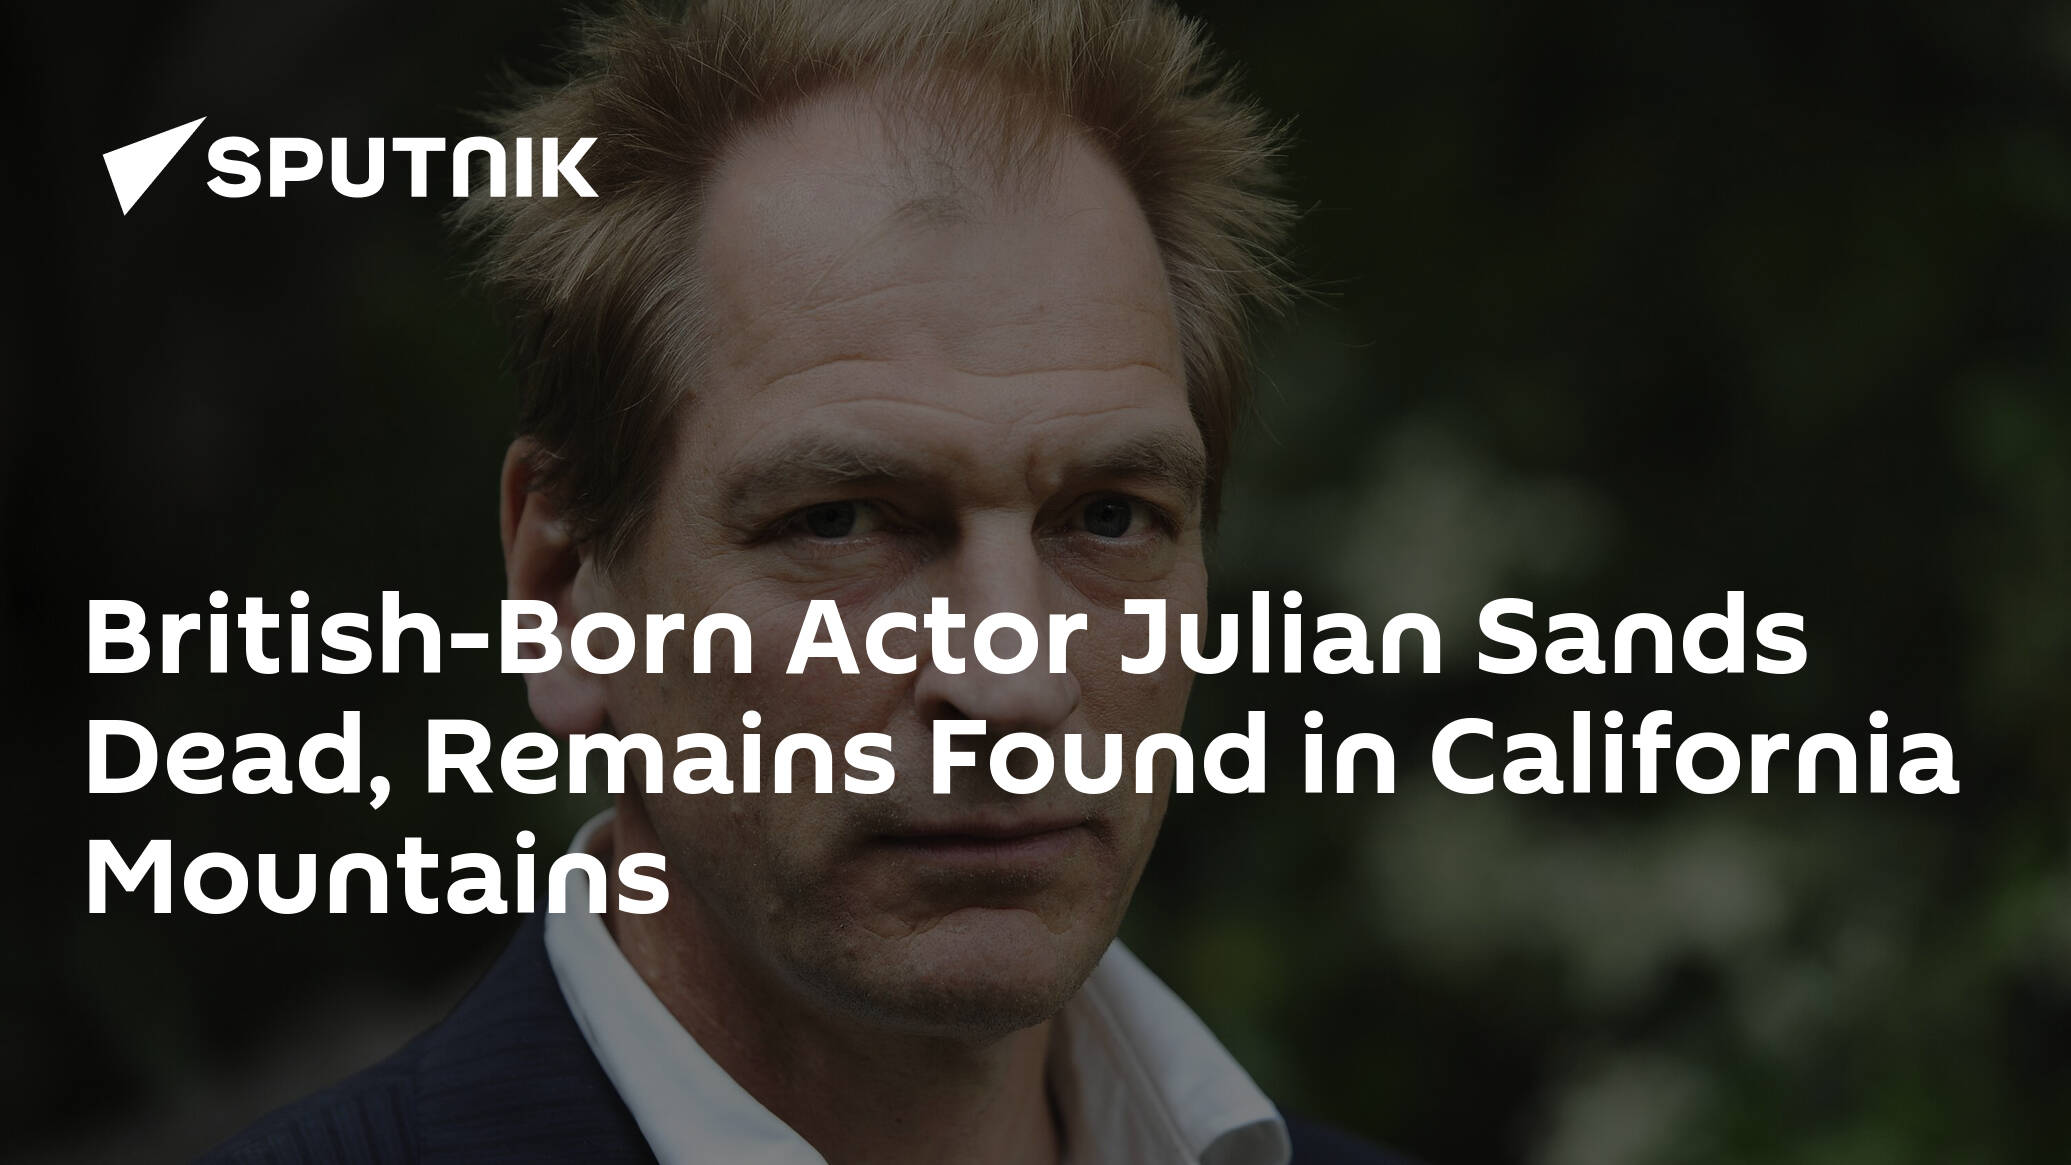 British-Born Actor Julian Sands Dead, Remains Found in California Mountains